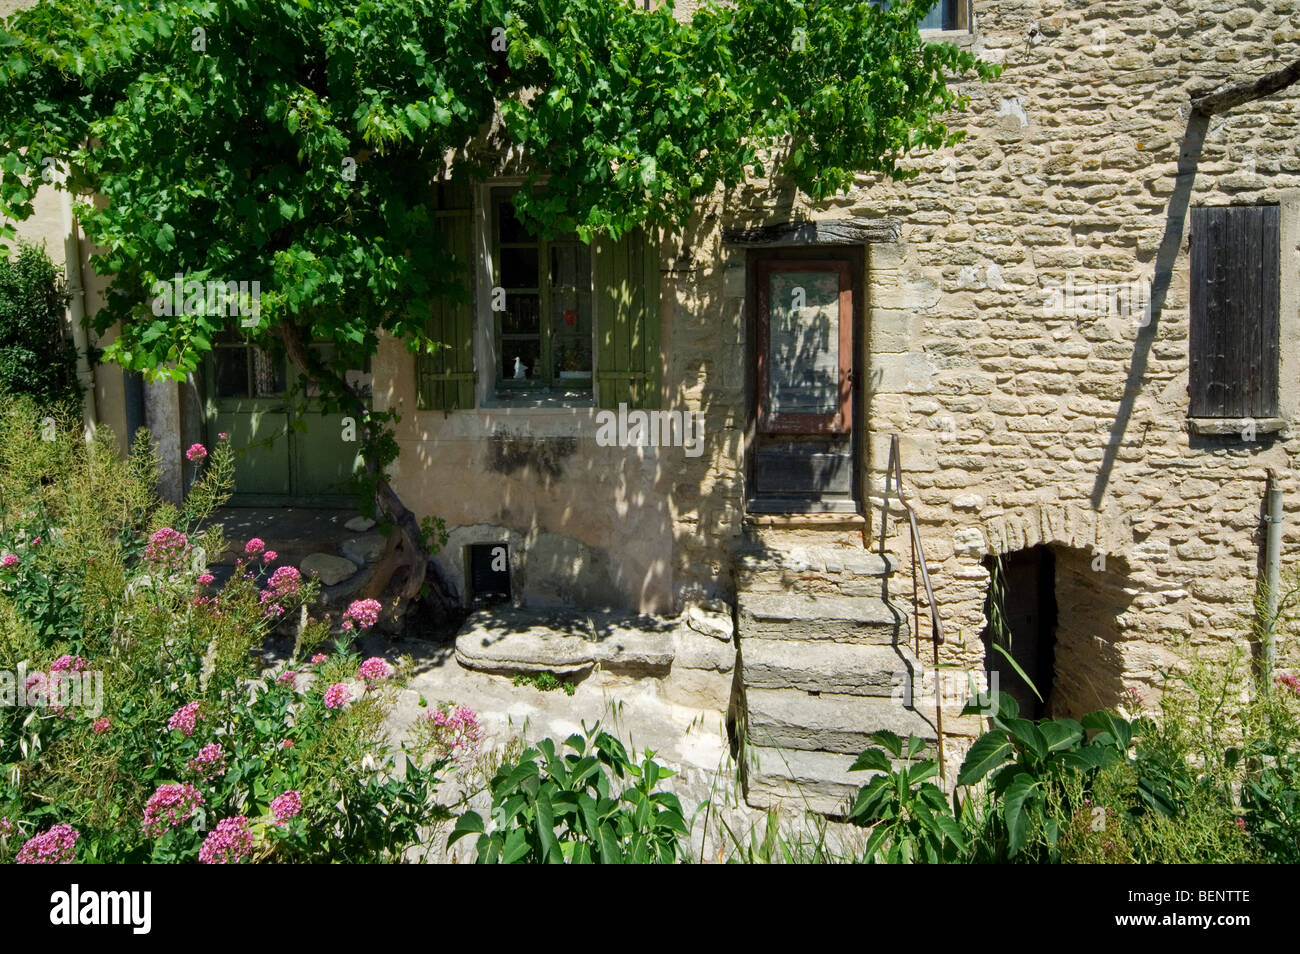 Grapevine growing on house front in alley of the village Gordes in the Vaucluse, Provence-Alpes-Côte d'Azur, Provence, France Stock Photo